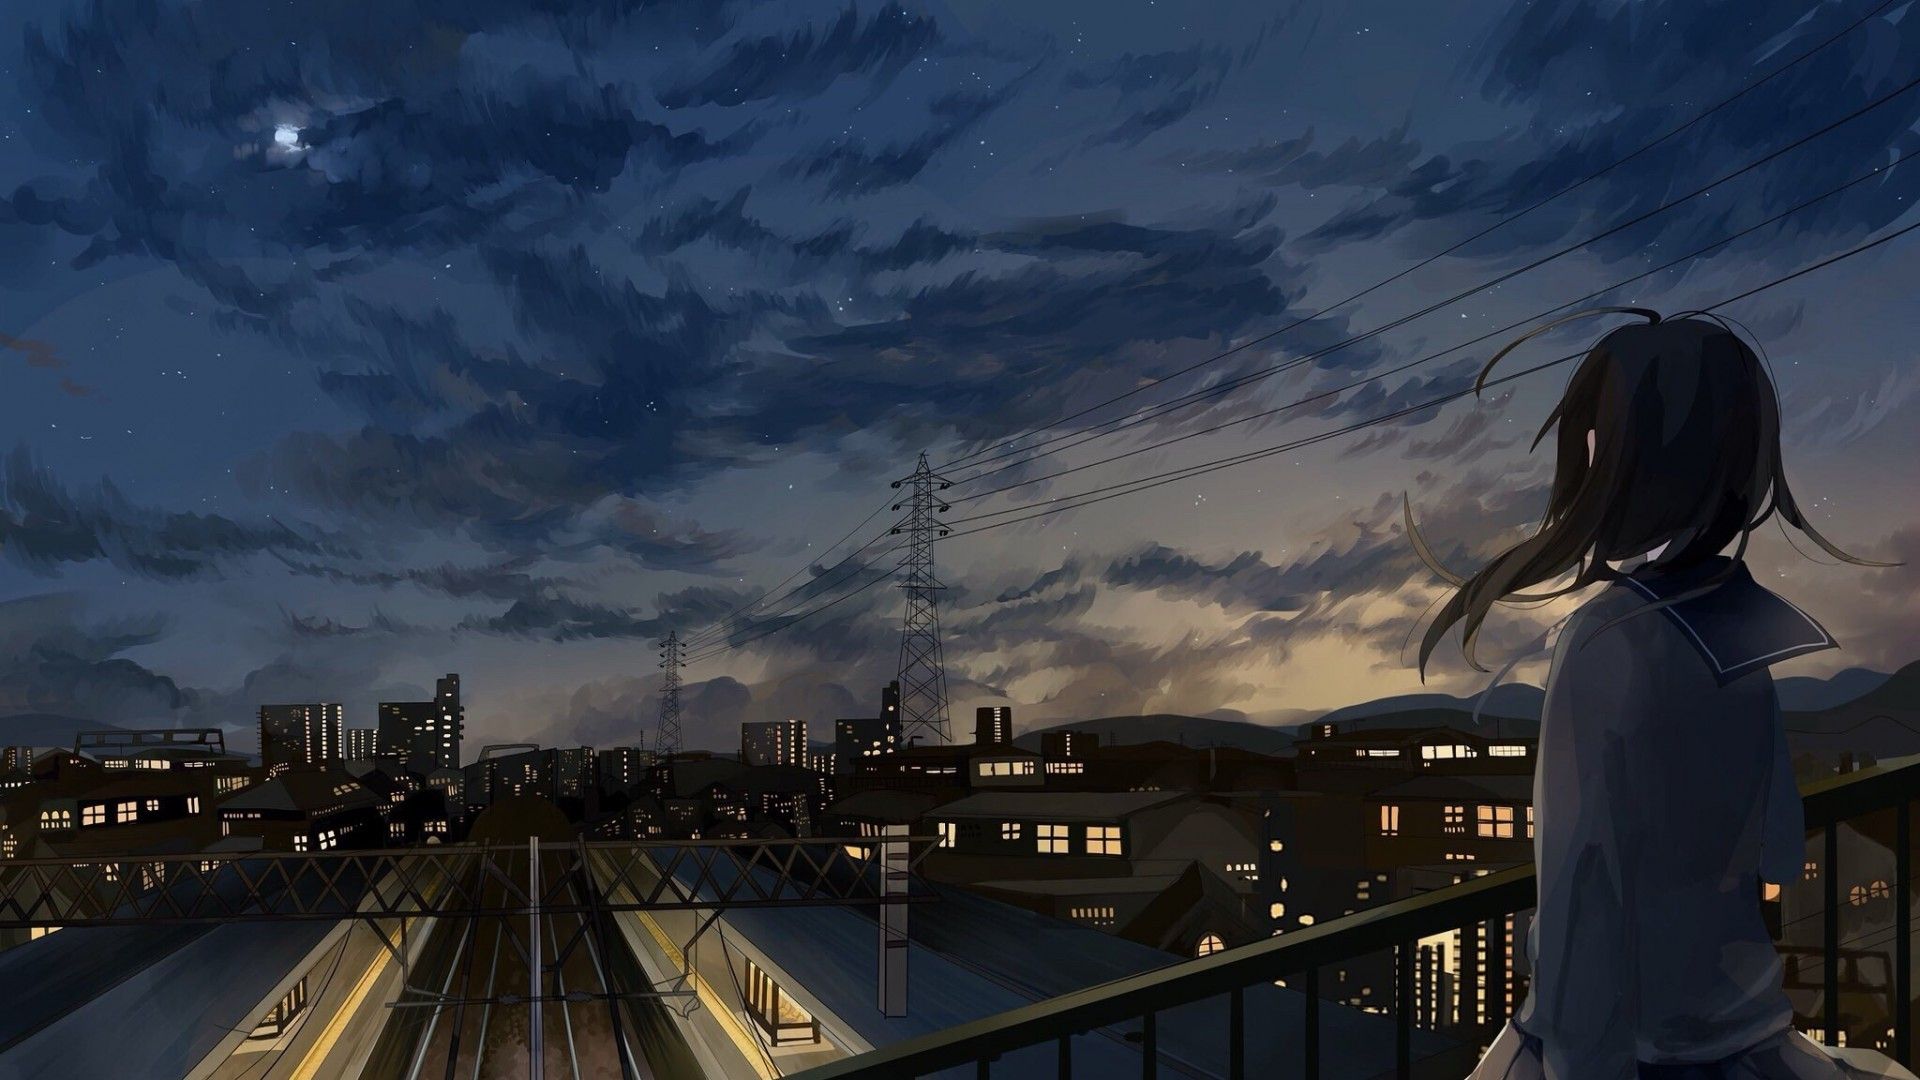 A beautiful anime night city wallpaper with a girl looking out over the city. - Anime city